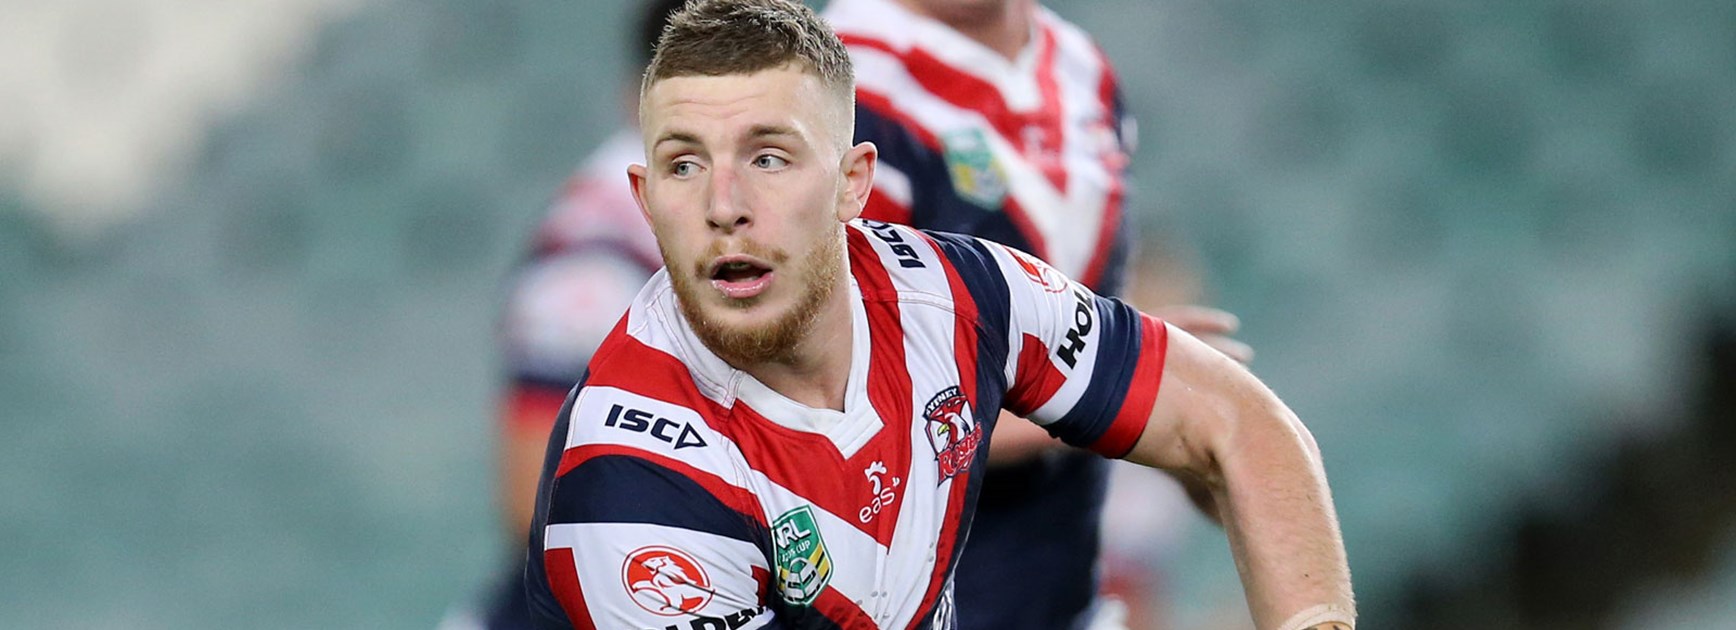 Roosters NYC playermaker Jackson Hastings helped his side to victory over the Broncos in Round 21.